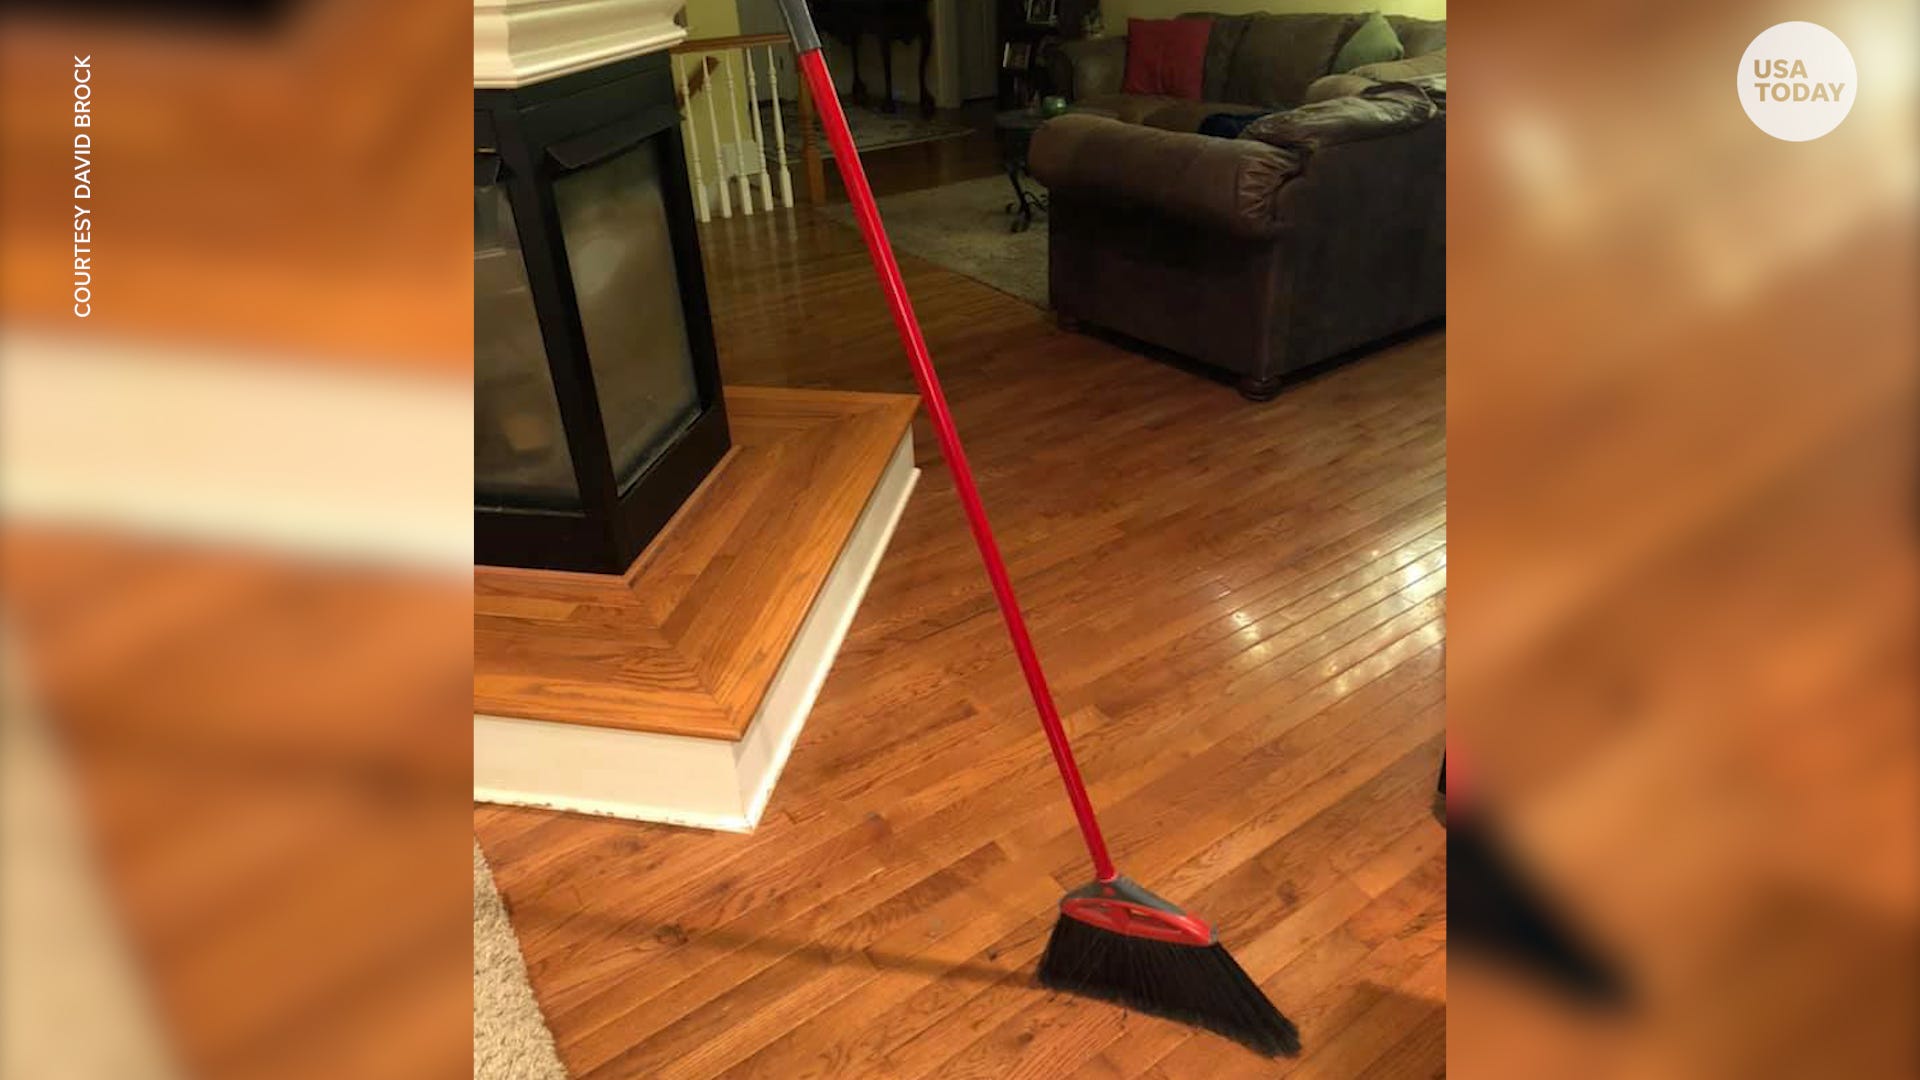 Broom Challenge Or Broom Hoax Truth About Earth S Gravitational Pull